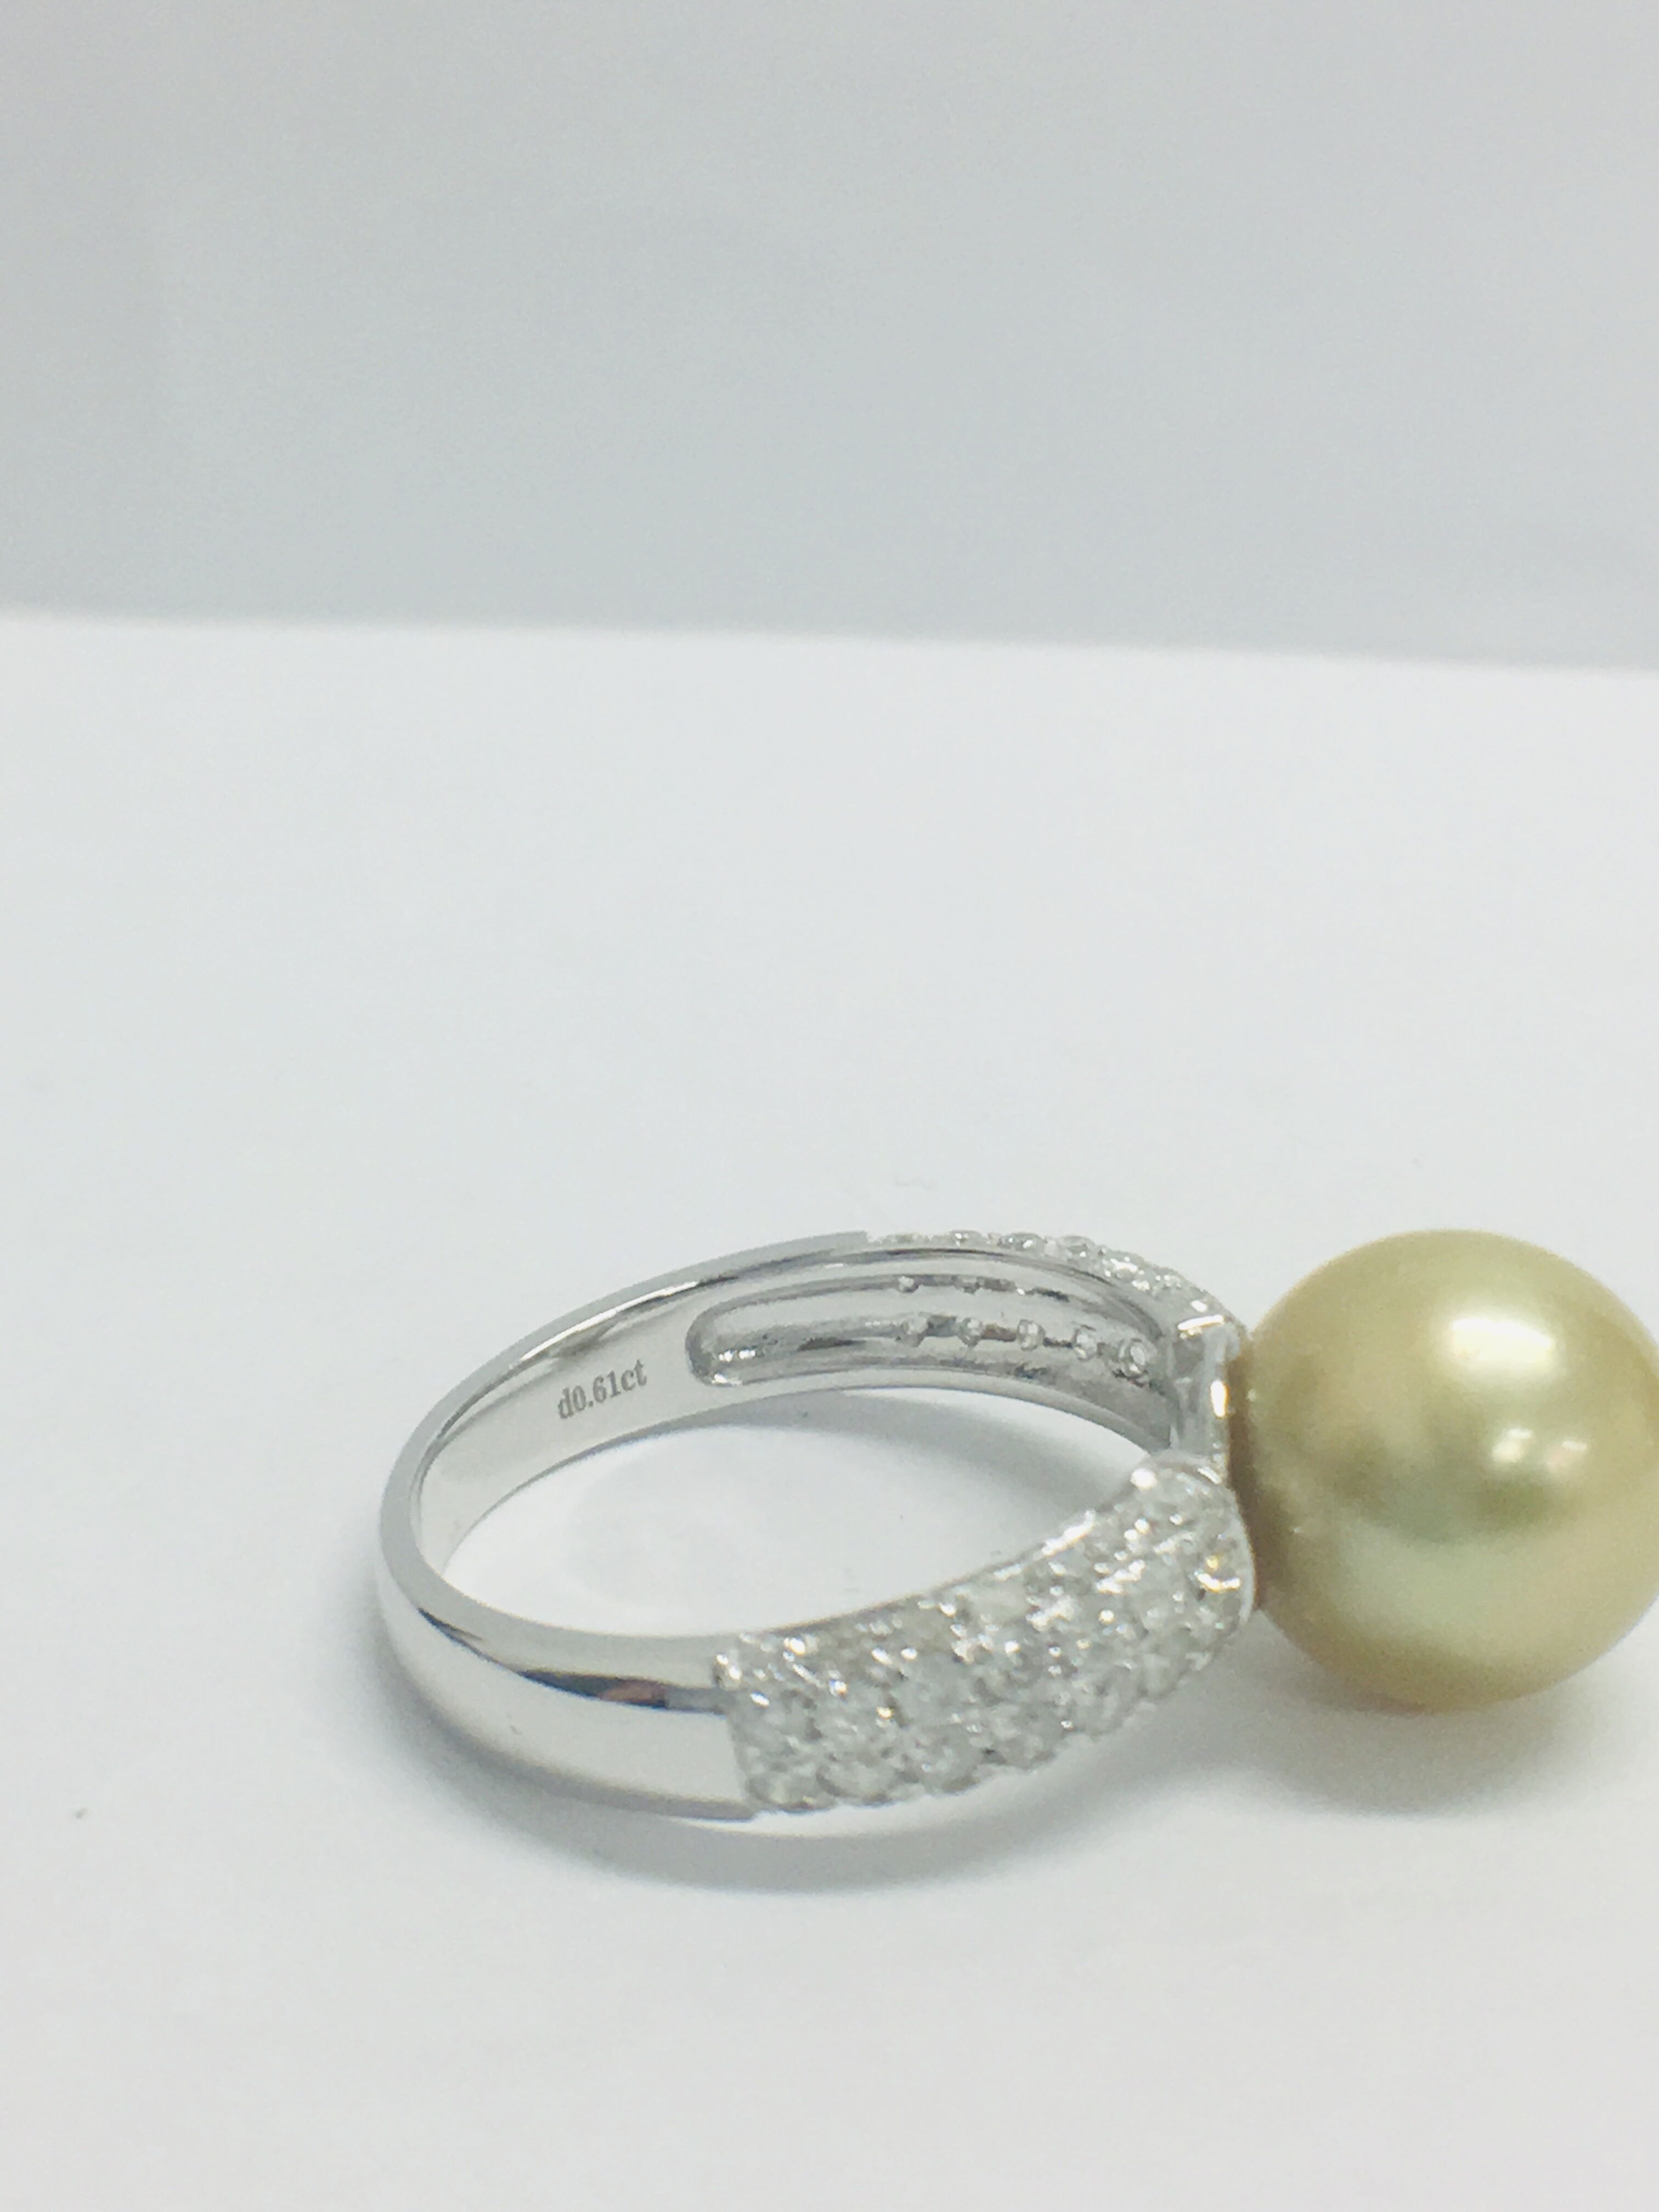 14ct White Gold Pearl & Diamond Ring - Image 8 of 11